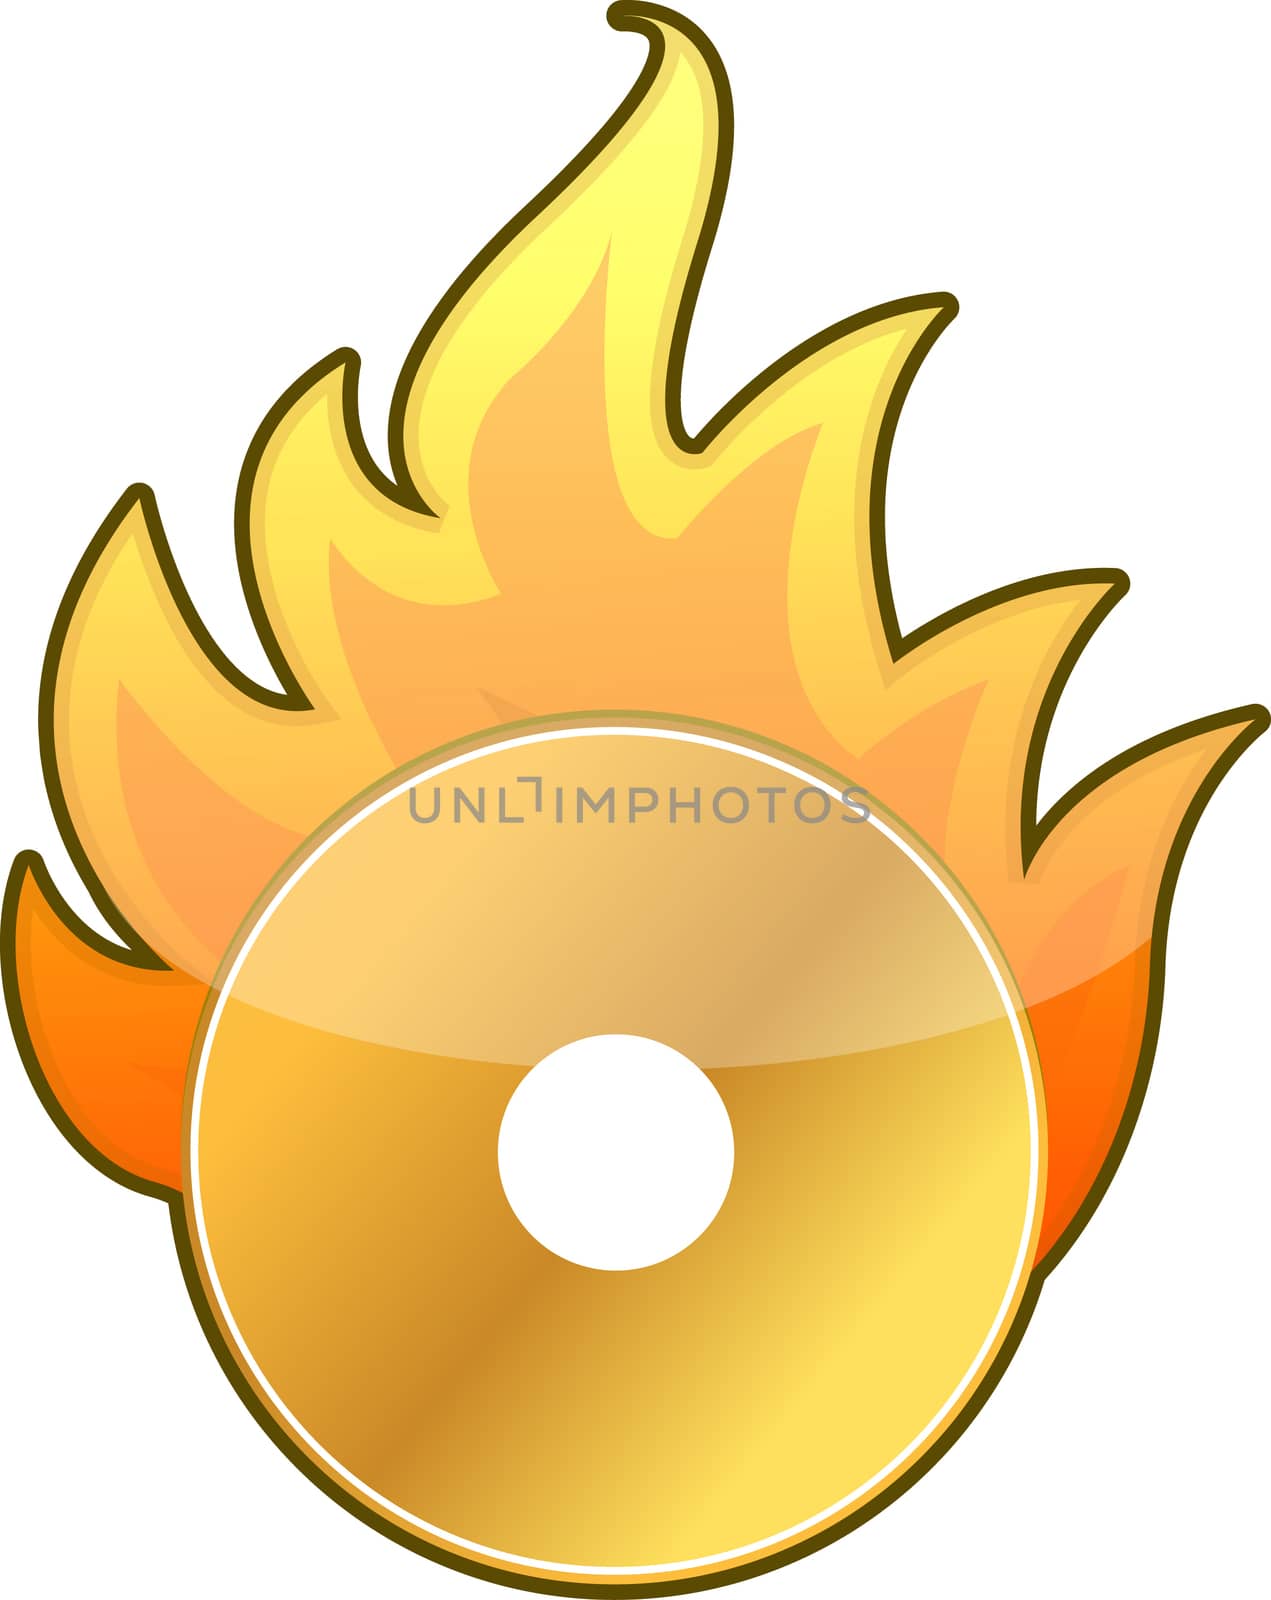 Burning CD DVD icon over a white background